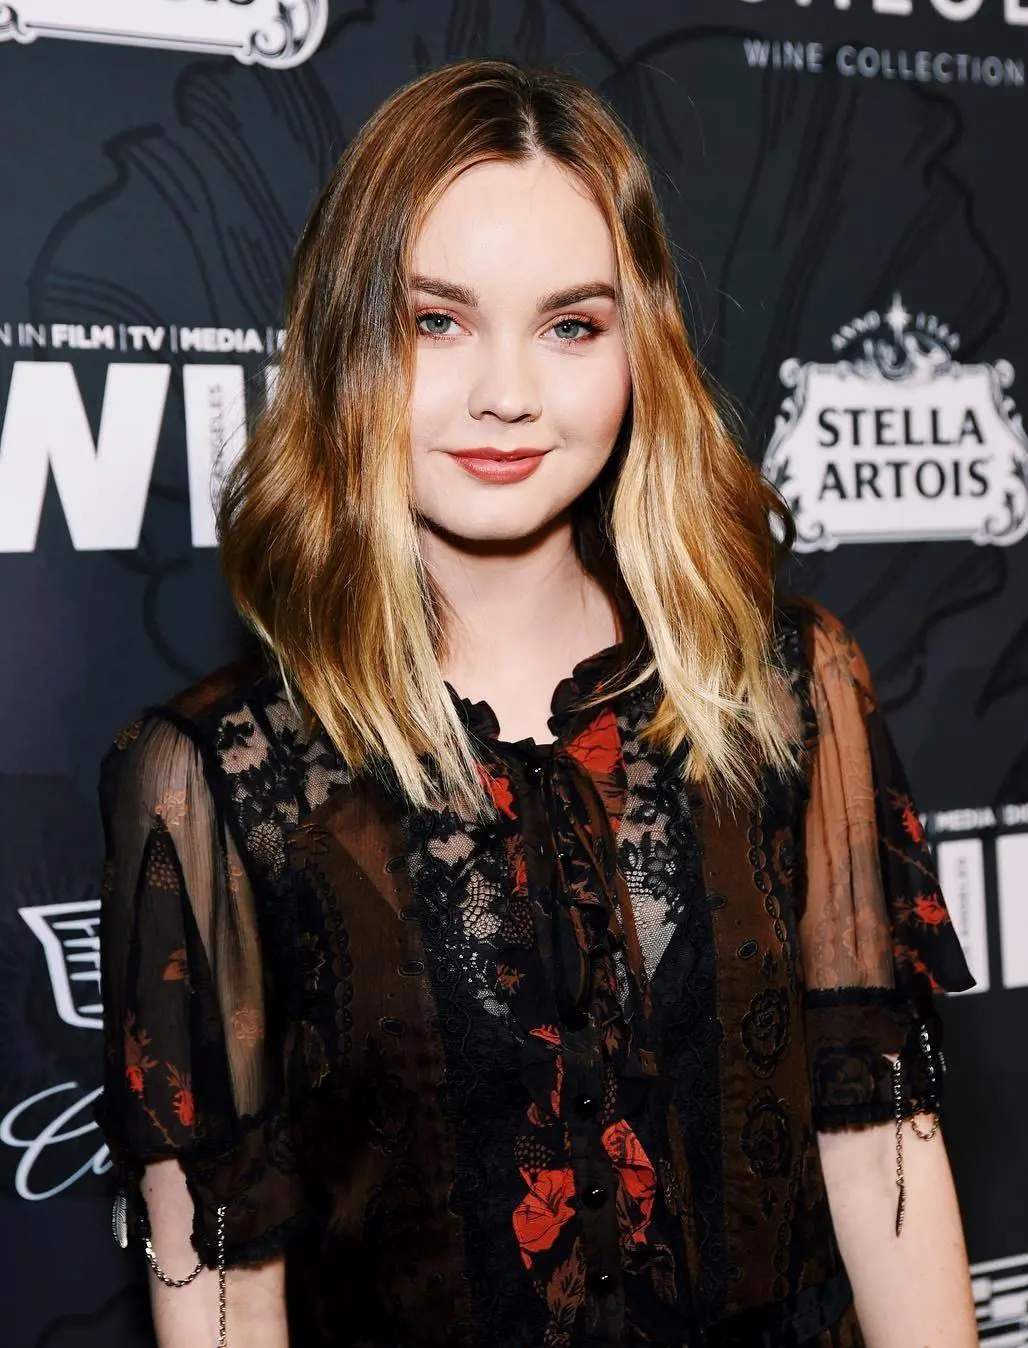 The Beach House star Liberato attending at Women In Film Oscar Party in Beverly Hills in February 2019